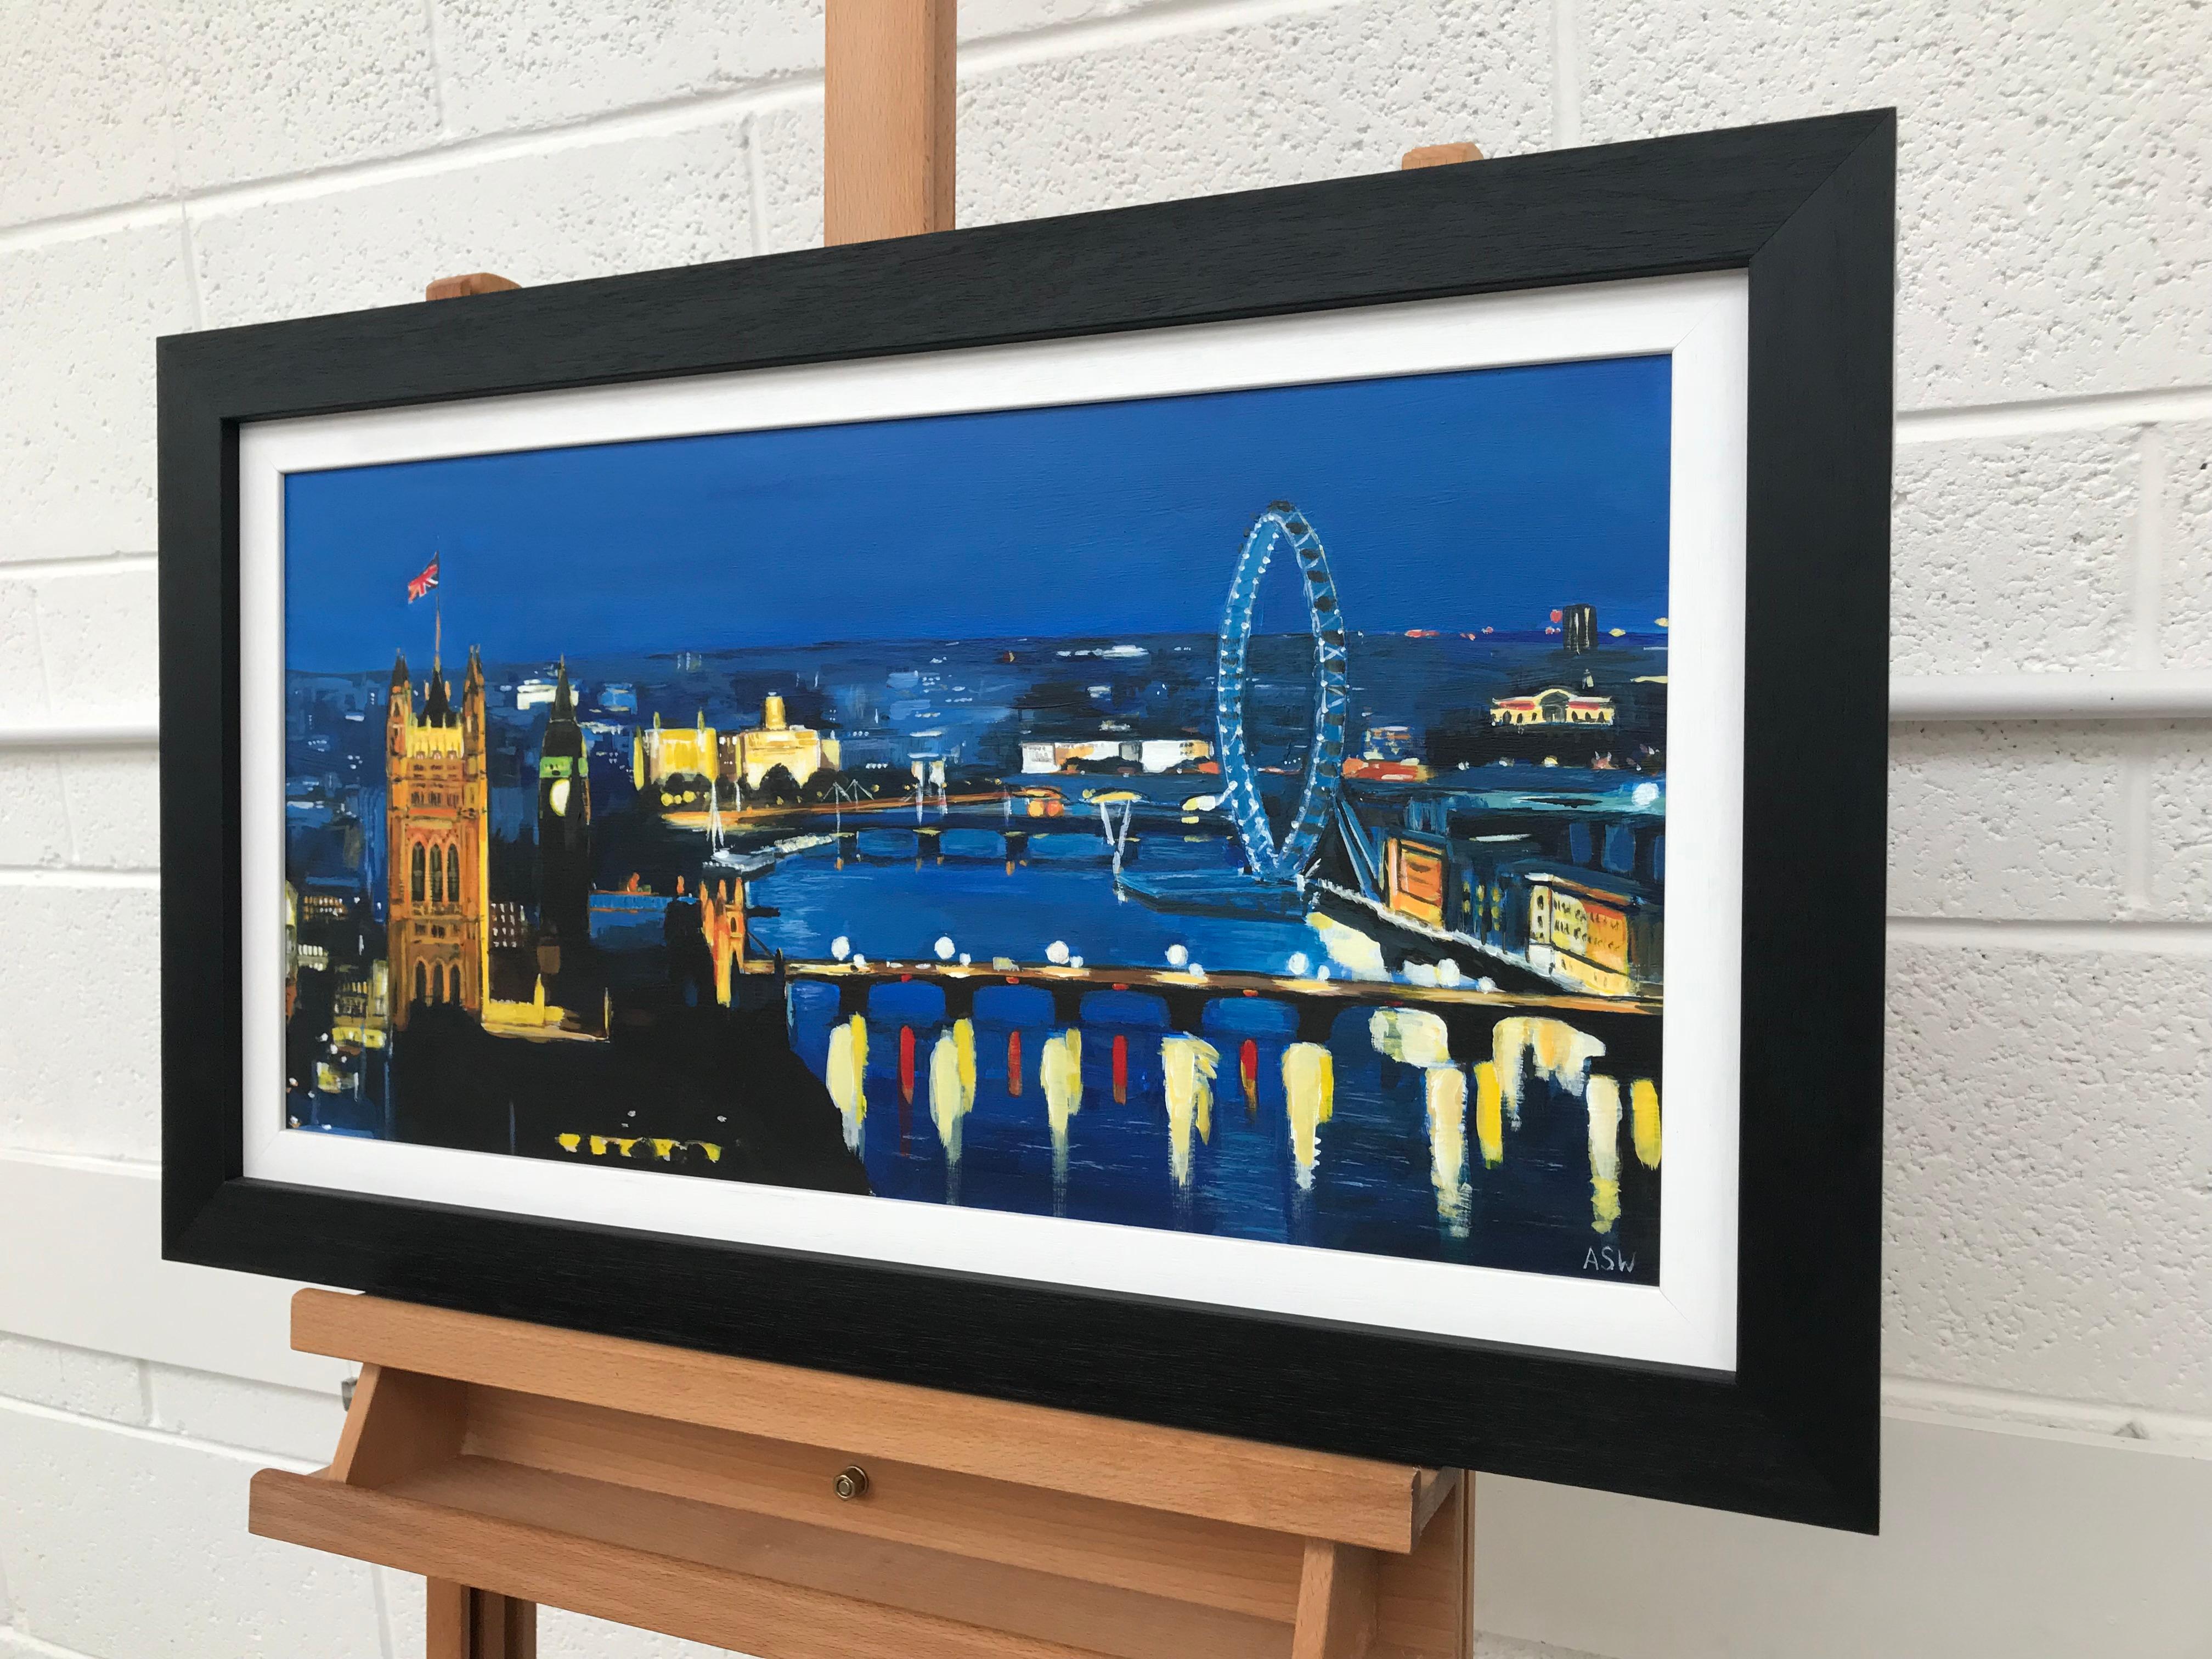 Unique Original Painting of the City of London River Thames at Night with Big Ben, Westminster, by British Urban Landscape Artist, Angela Wakefield. Thames, London by Night No.4 is part of Angela's London Collection.

Art measures 24 x 12